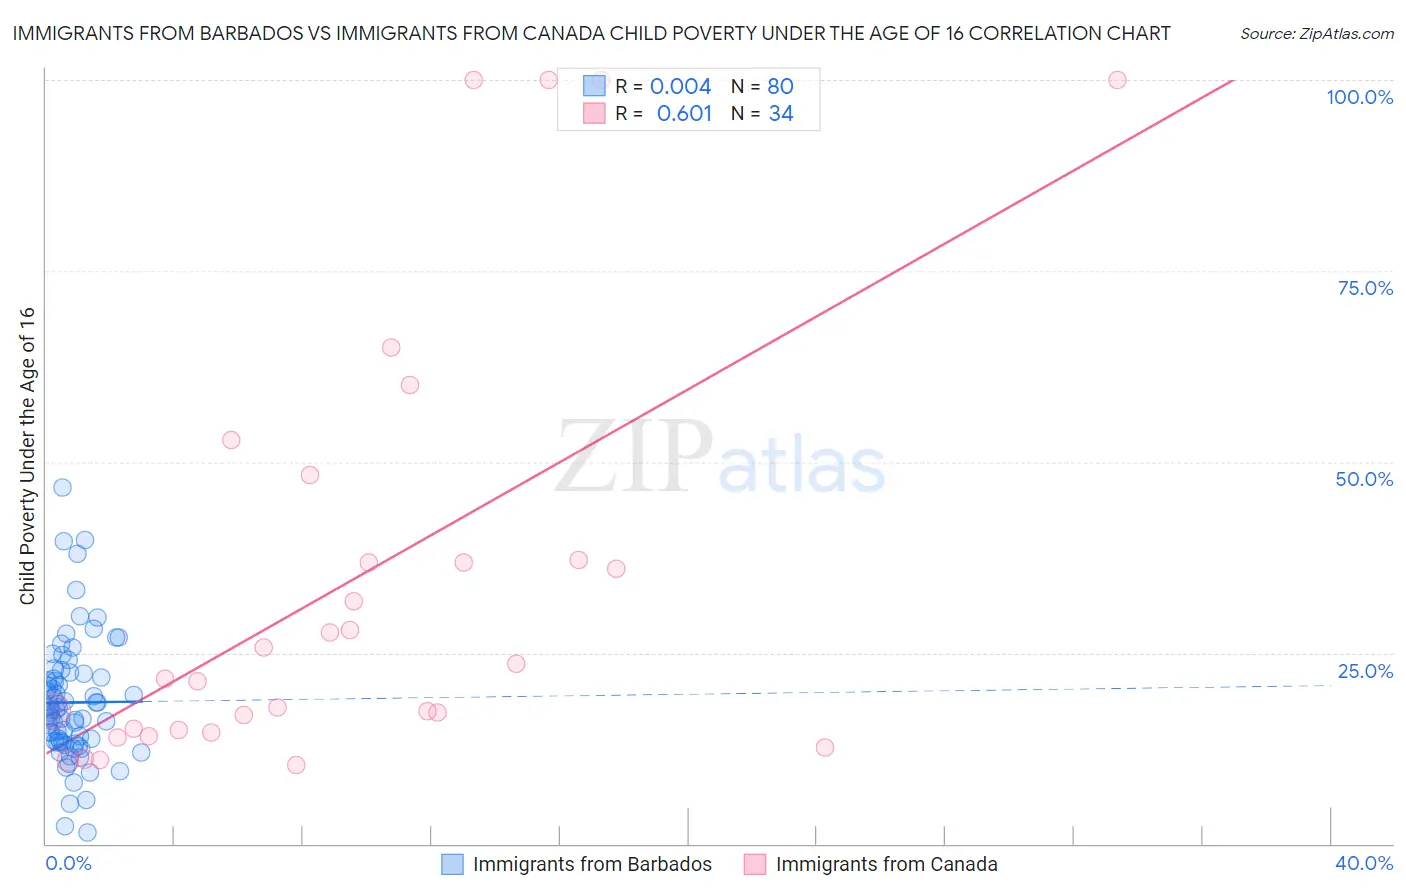 Immigrants from Barbados vs Immigrants from Canada Child Poverty Under the Age of 16